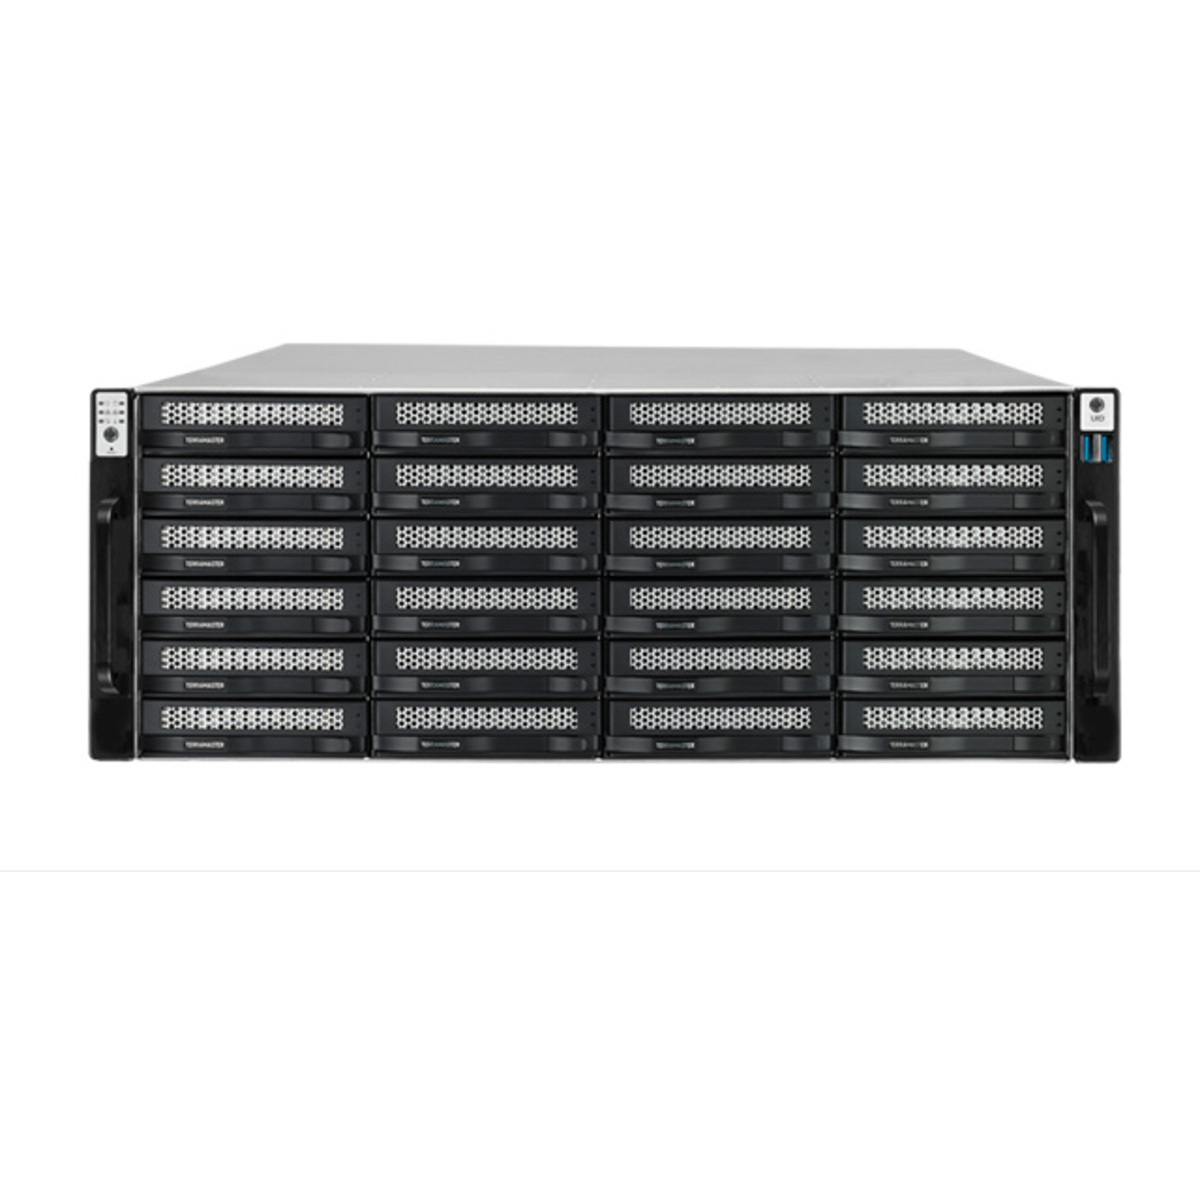 TerraMaster U24-722-2224 272tb 24-Bay RackMount Large Business / Enterprise NAS - Network Attached Storage Device 17x16tb Seagate IronWolf ST16000VN001 3.5 7200rpm SATA 6Gb/s HDD NAS Class Drives Installed - Burn-In Tested U24-722-2224